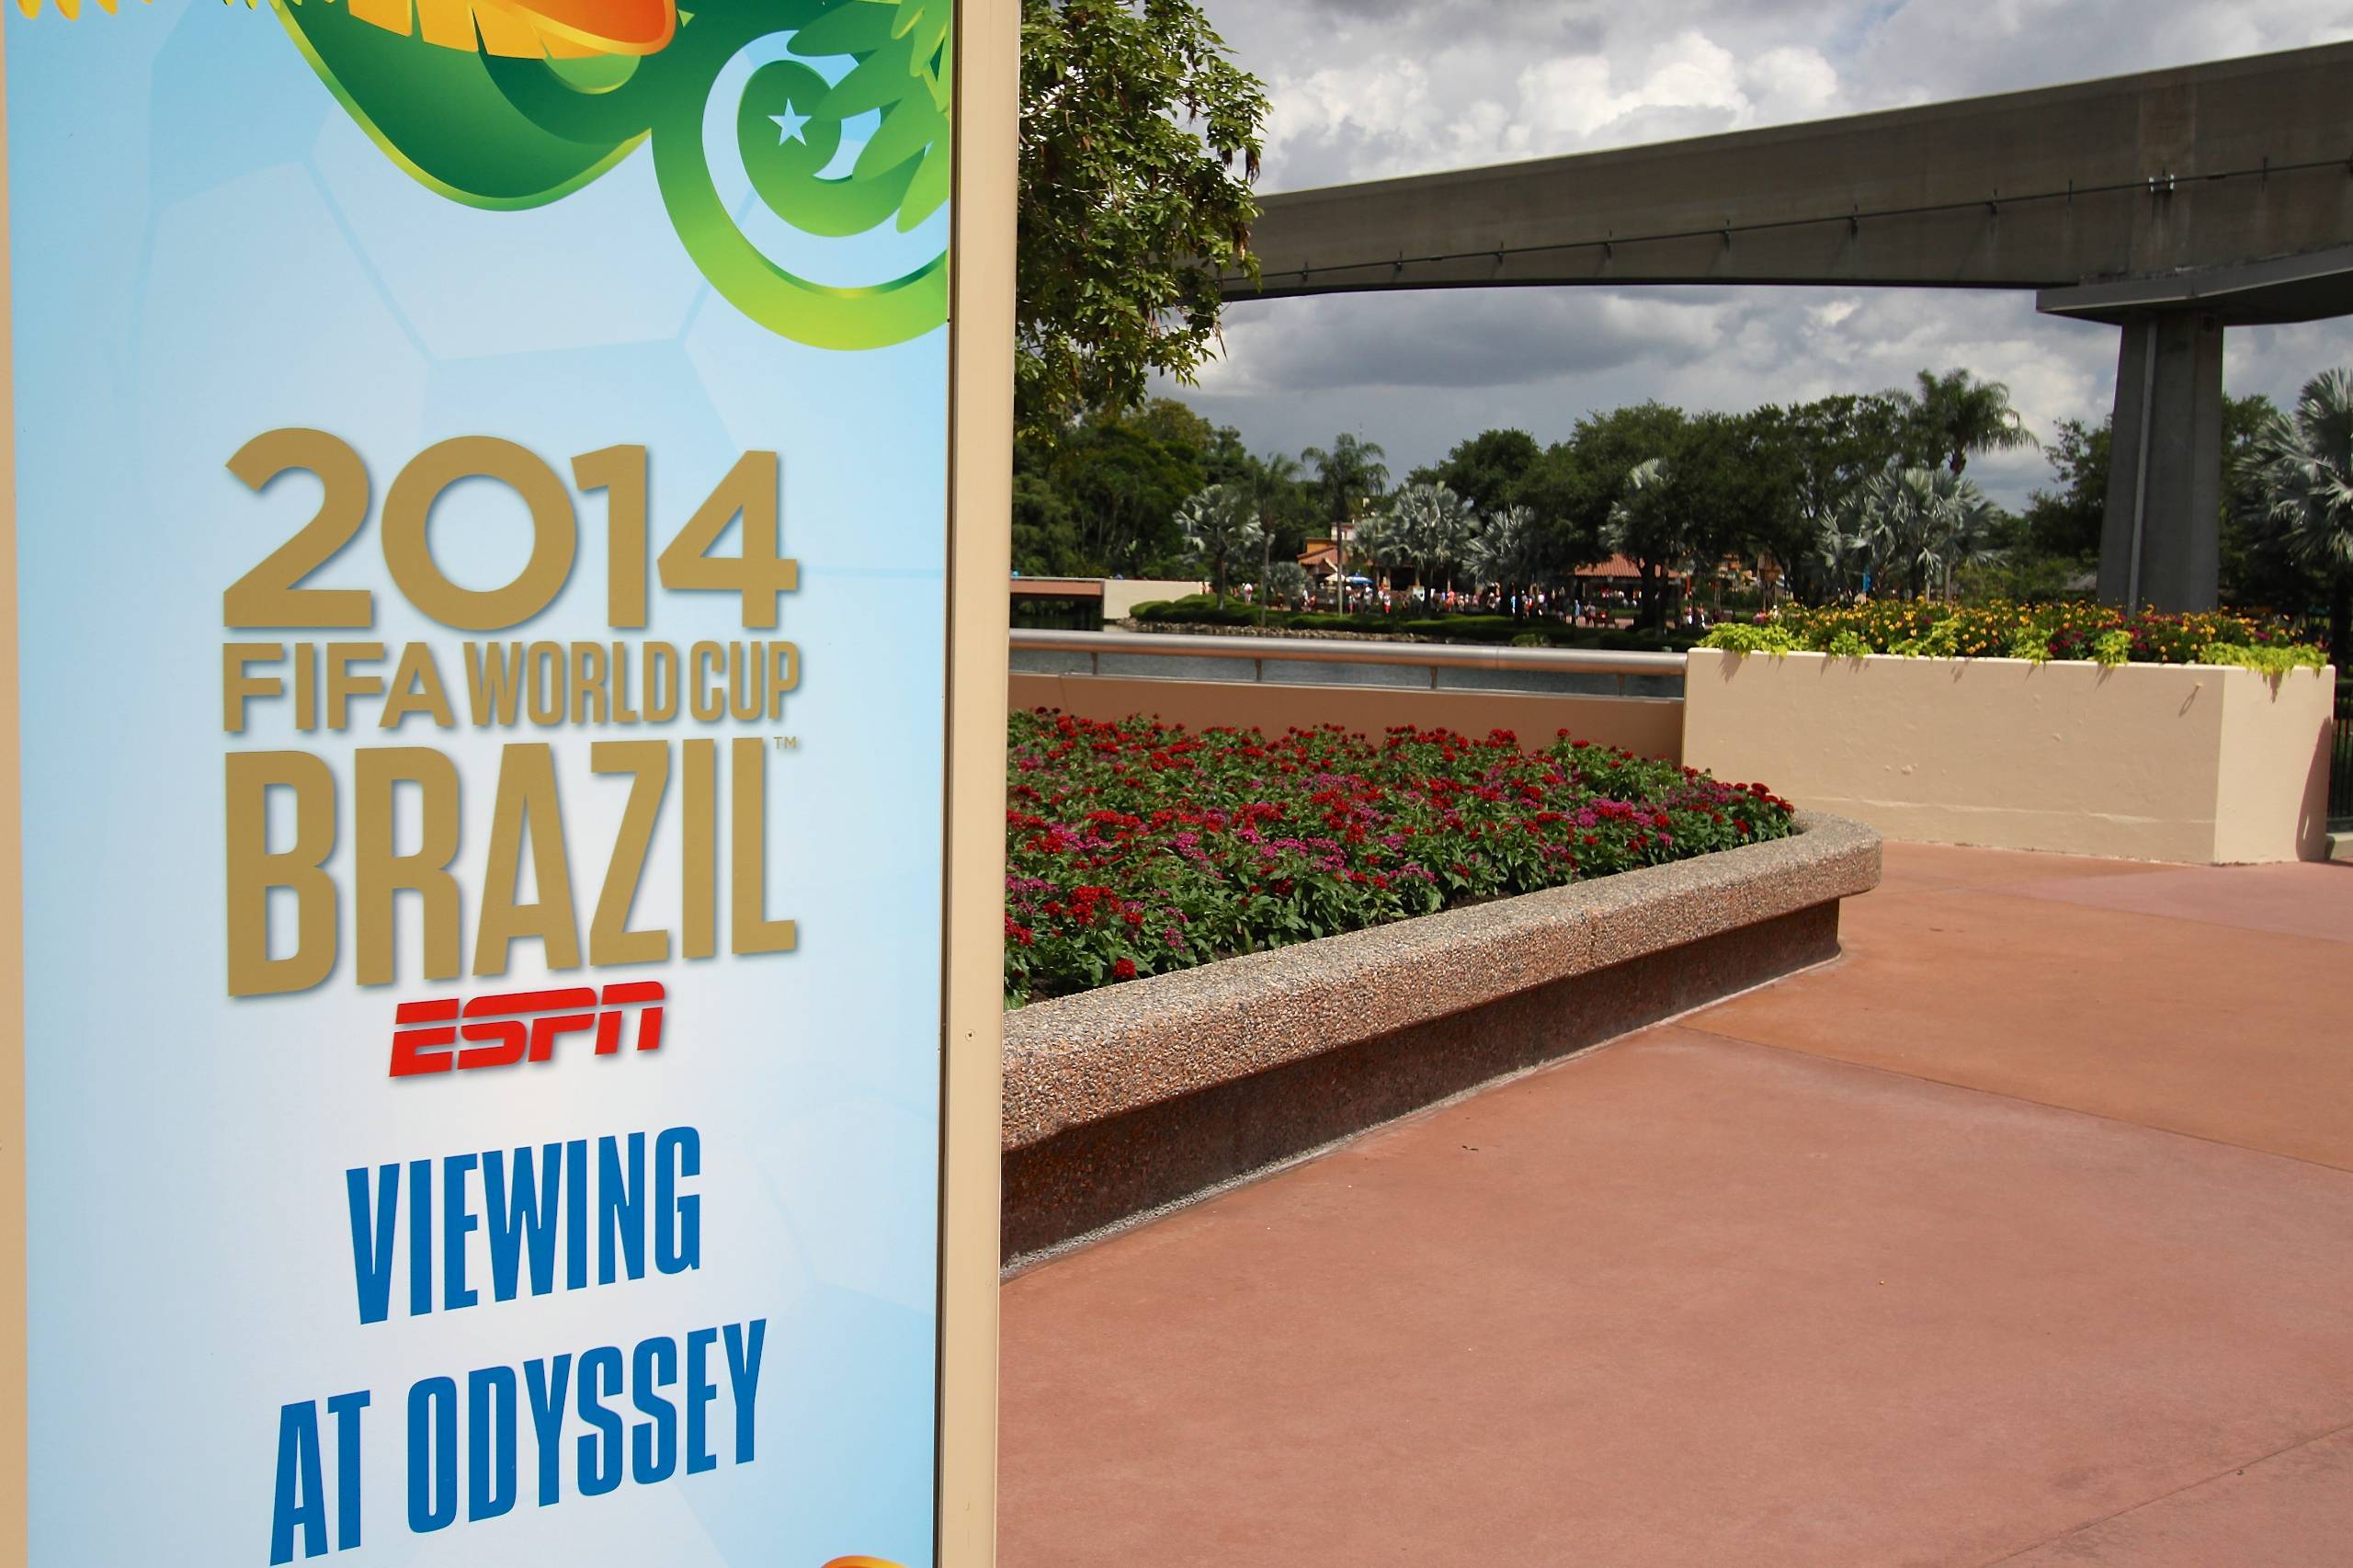 2014 Brazil FIFA World Cup at Epcot